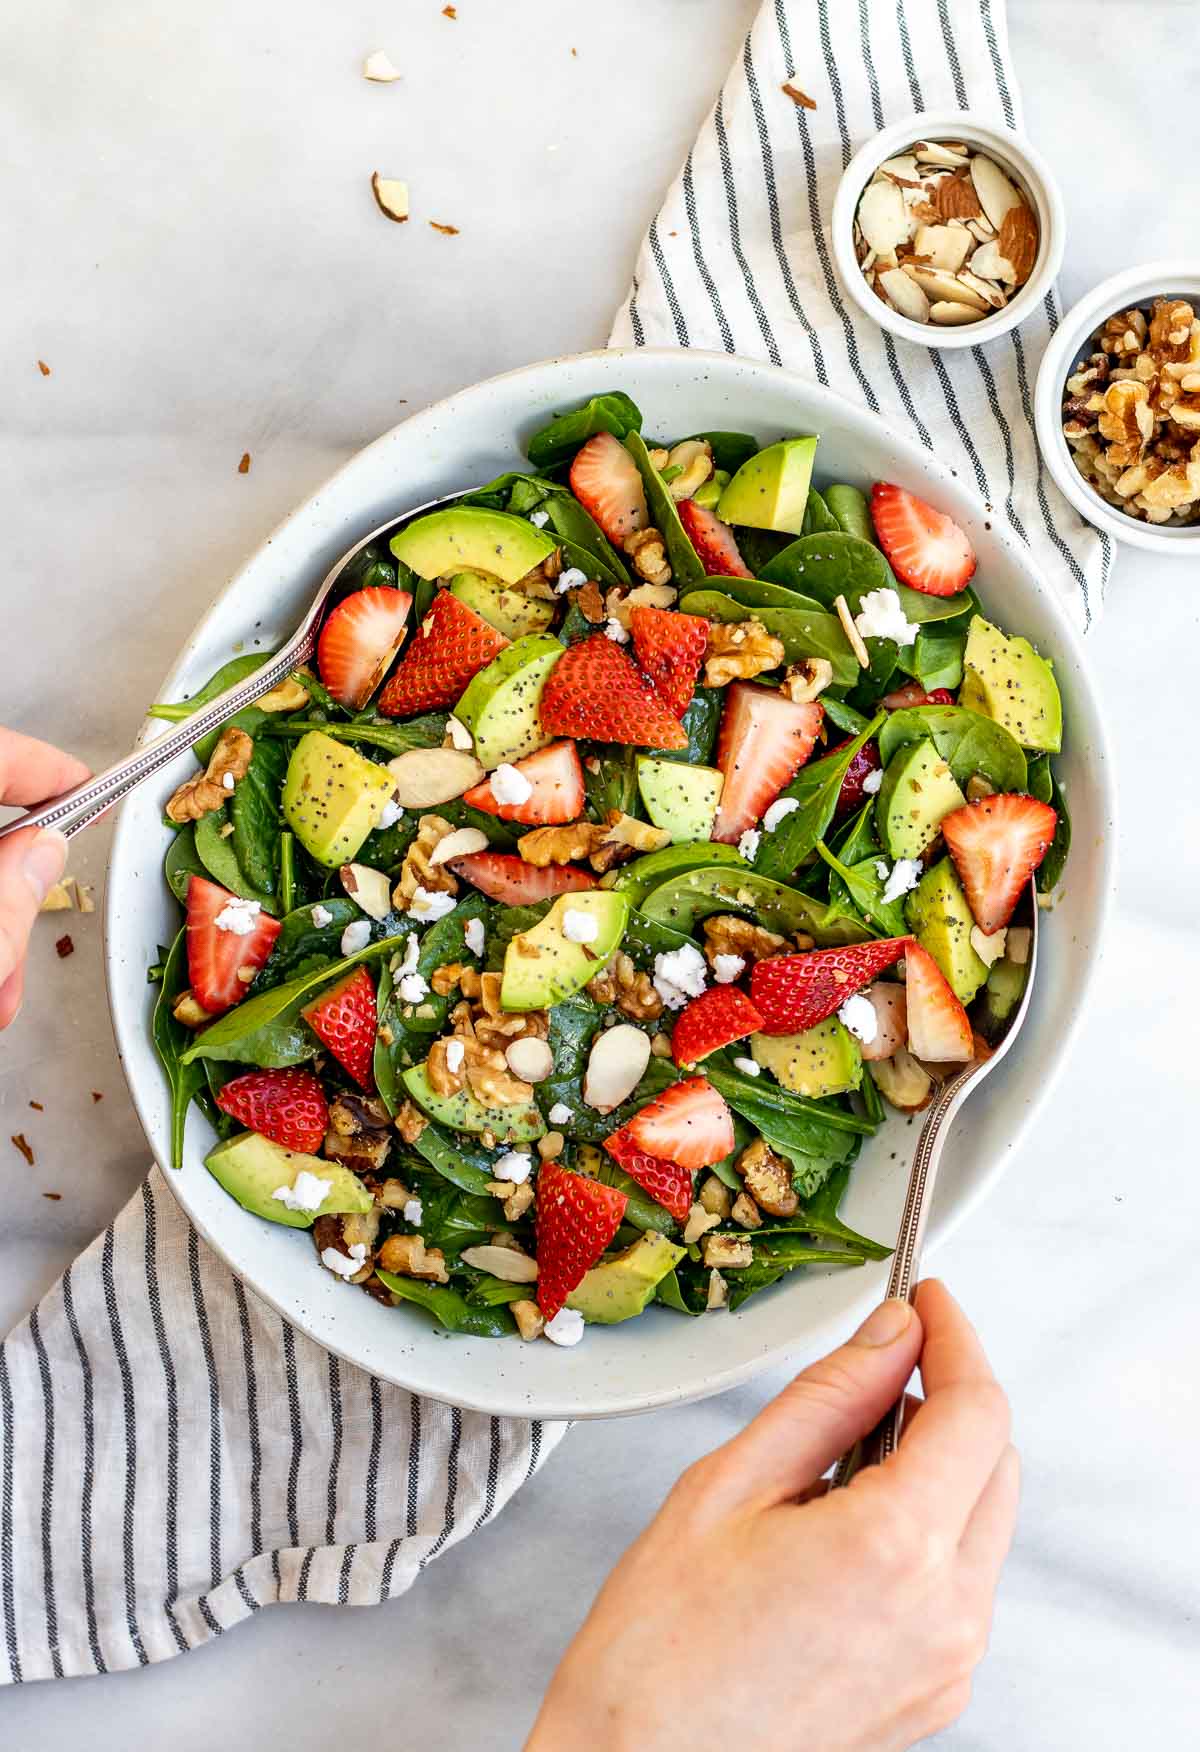 Spinach Strawberry Salad with Poppy Seed Dressing | Eat With Clarity